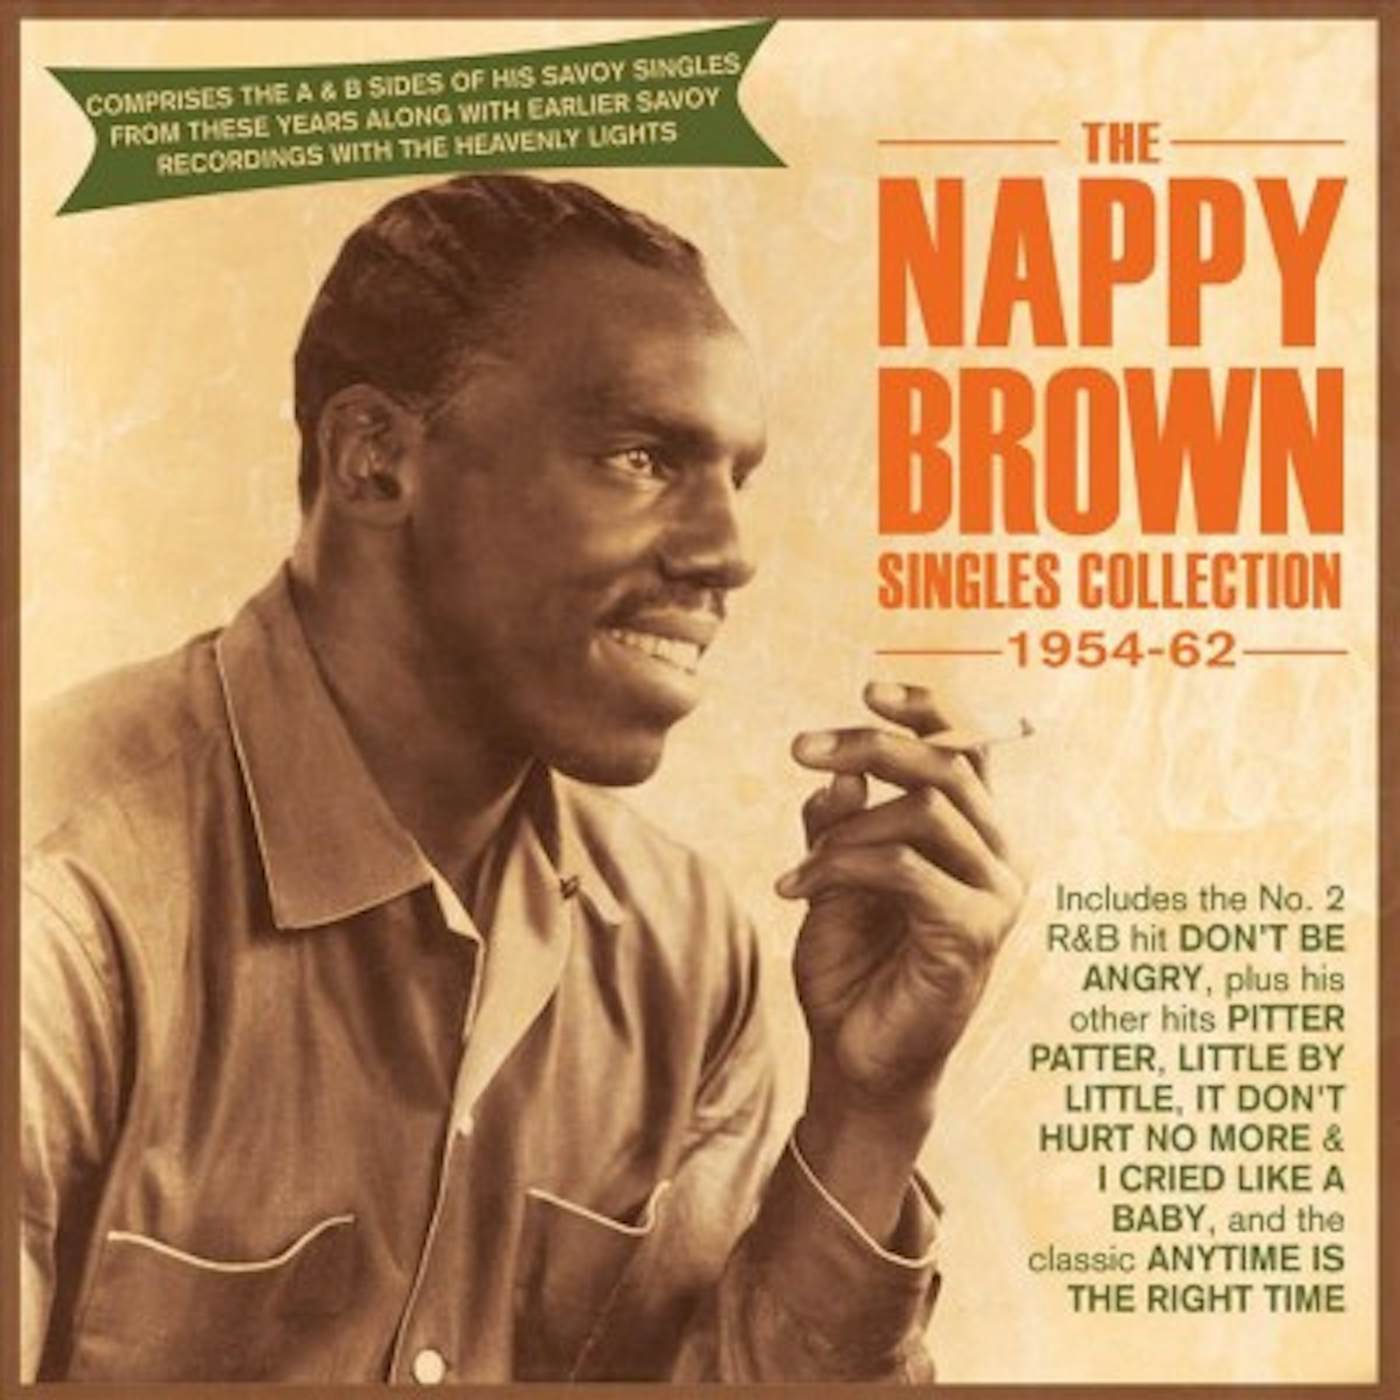 Nappy Brown SINGLES COLLECTION 1954-62 CD